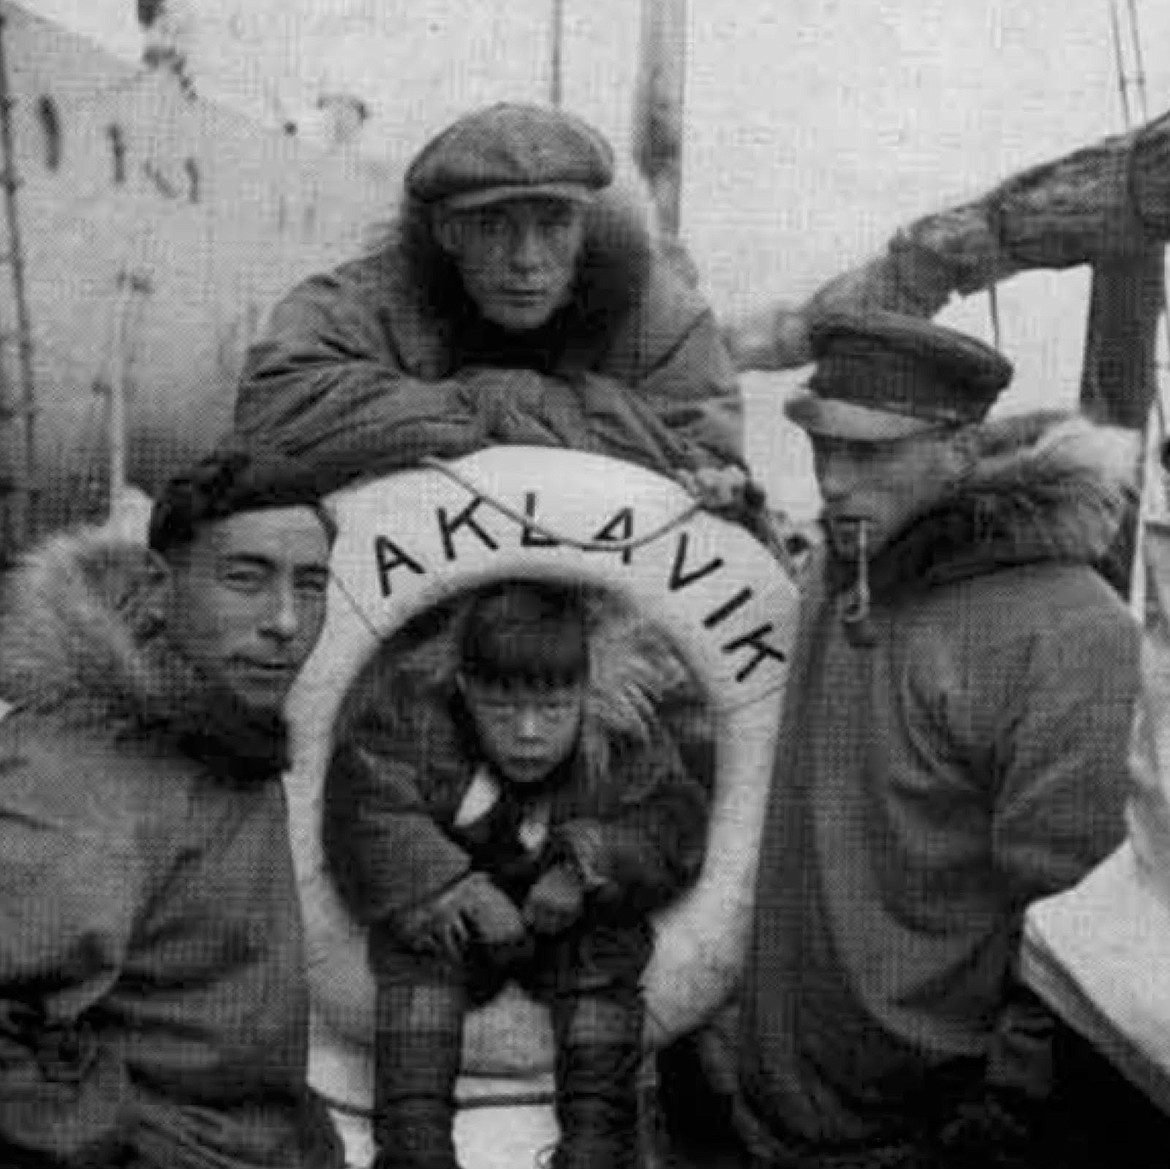 PUBLIC DOMAIN
Christian Klengenberg&#146;s son Patsy on left with his adopted son aboard Aklavik.